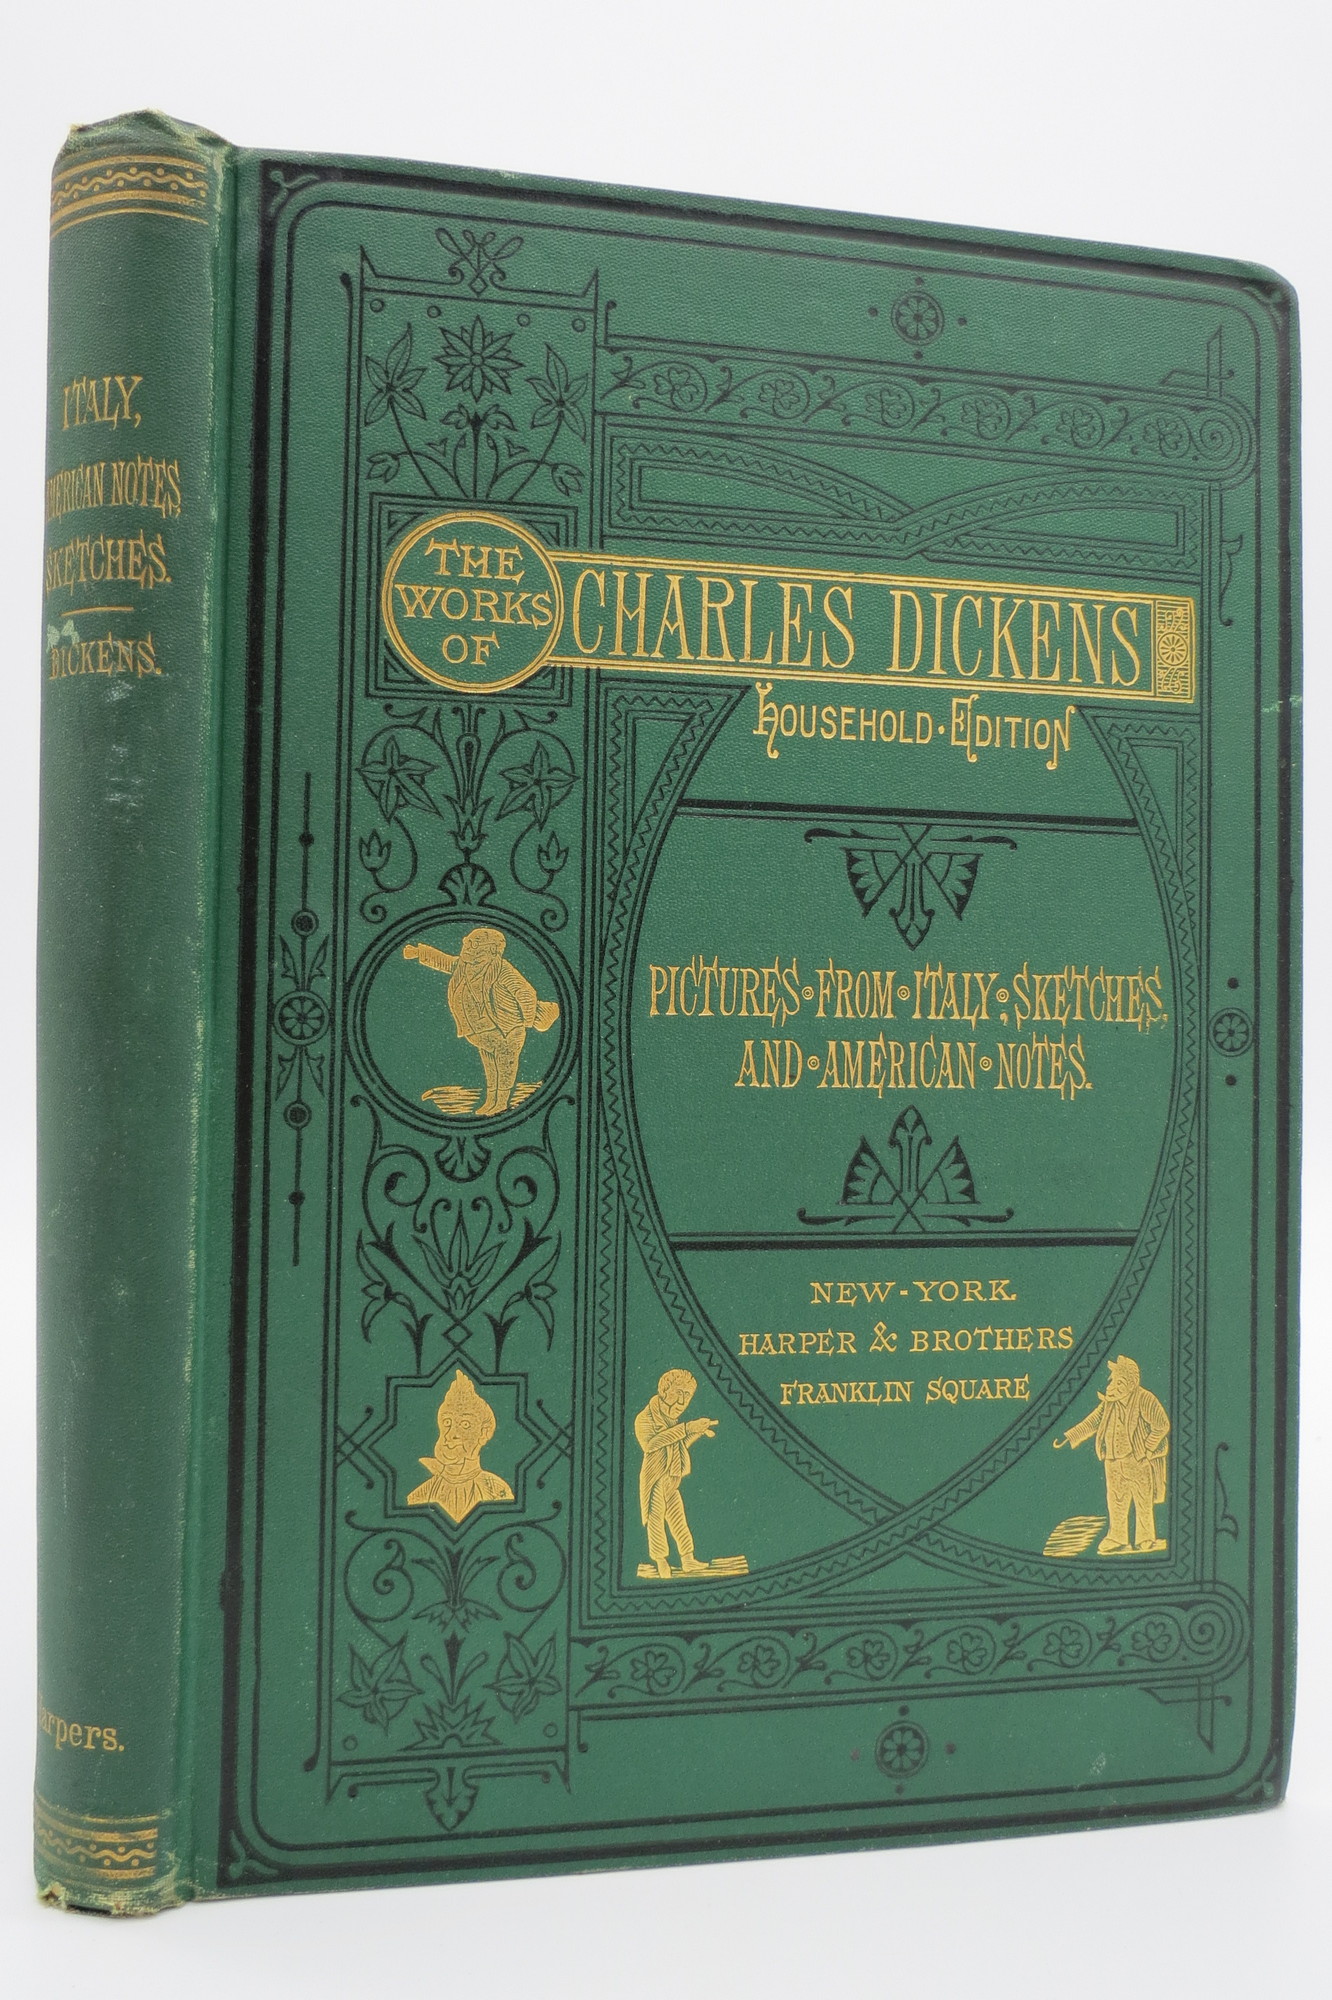 Image for PICTURES FROM ITALY, SKETCHES BY BOZ, AND AMERICAN NOTES (FROM THE WORKS OF CHARLES DICKENS HOUSEHOLD EDITION)   (Fine Victorian Binding)